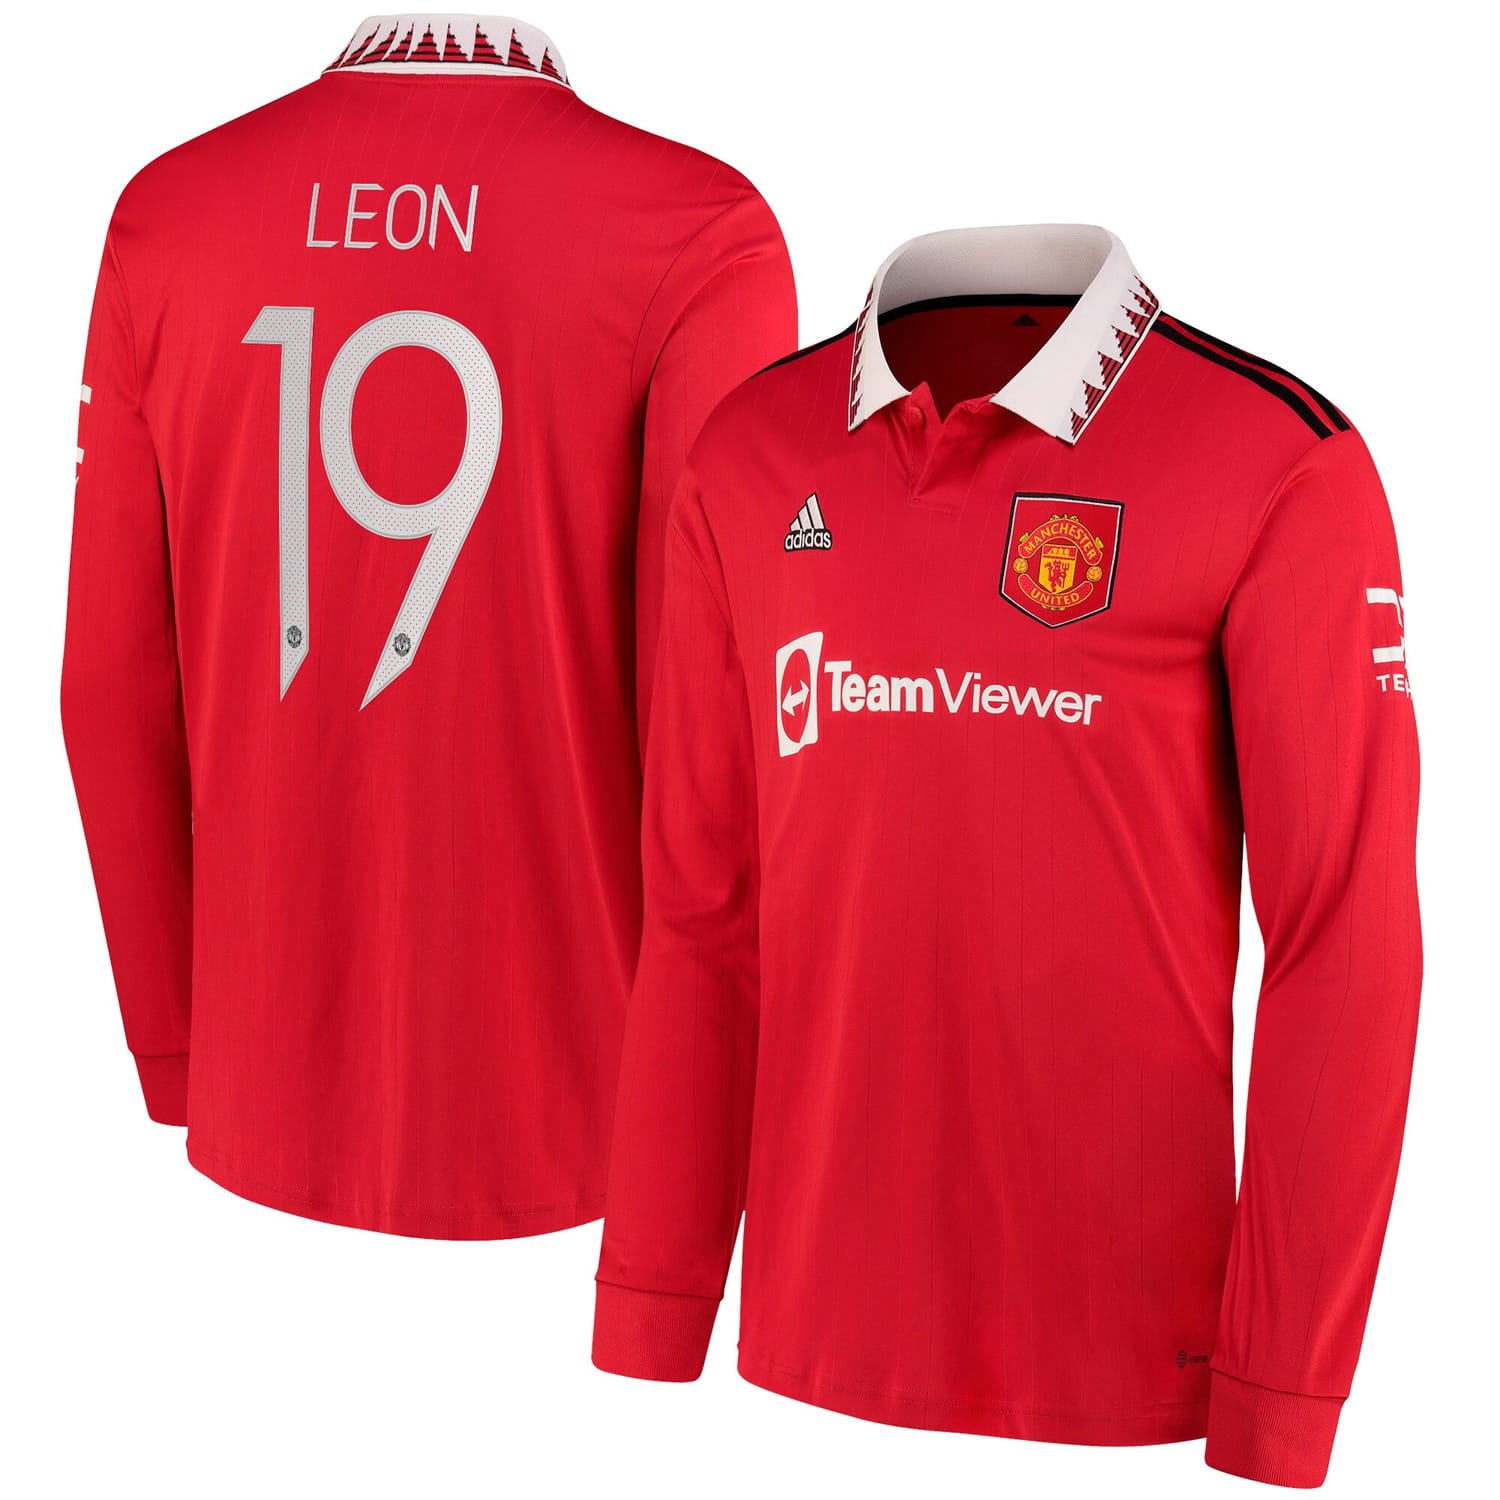 Premier League Manchester United Home Cup Jersey Shirt Long Sleeve 2022-23 player Adriana Leon 19 printing for Men